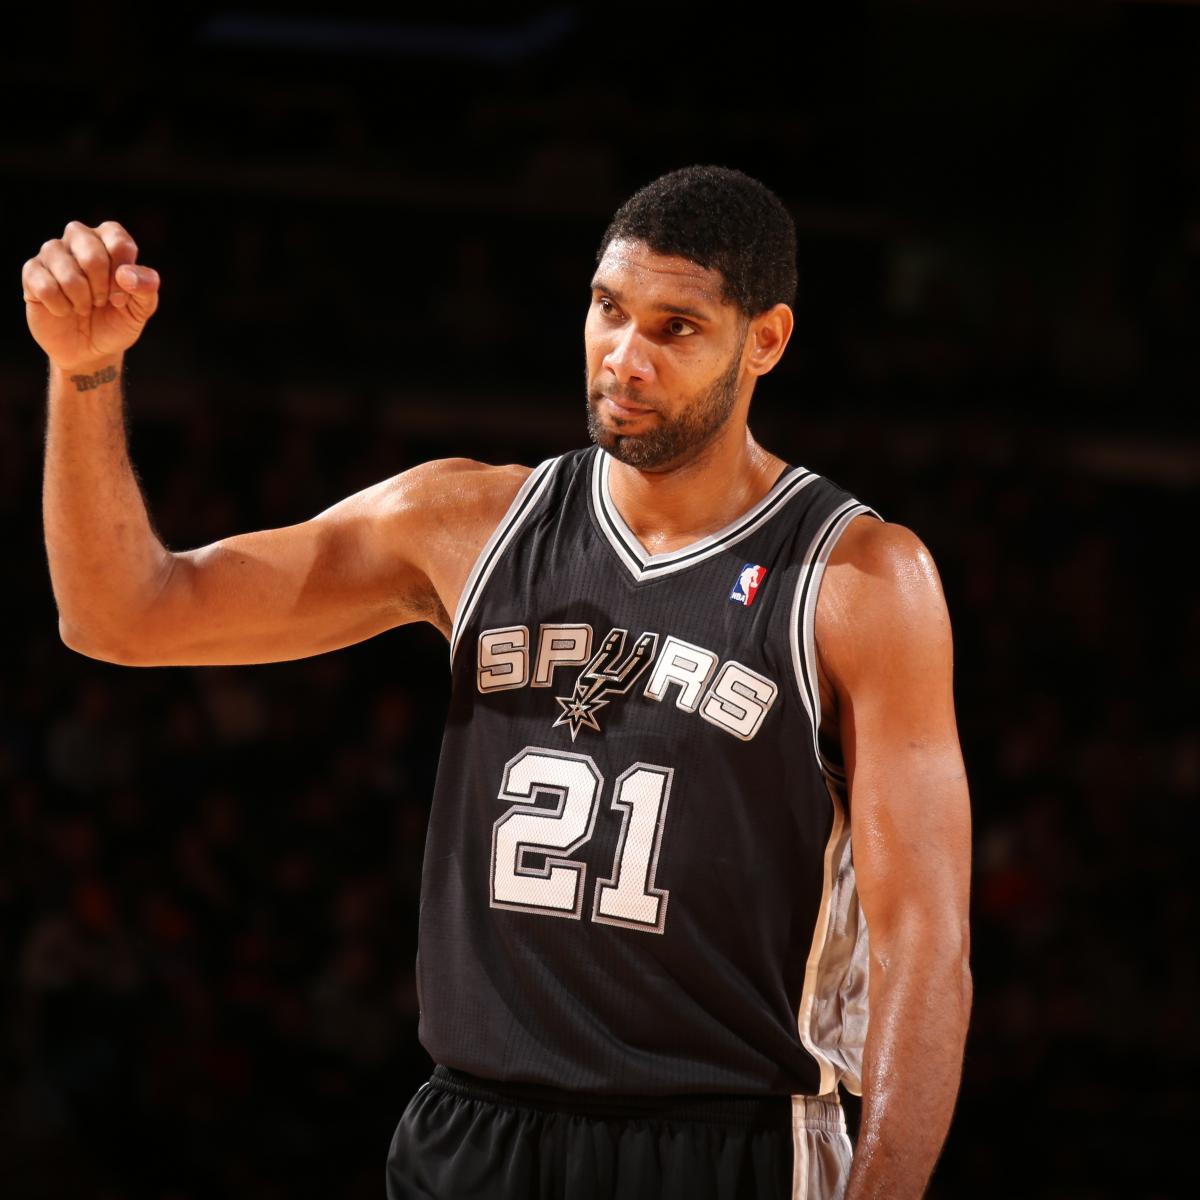 Tim Duncan's GameWinner Shows Desire for 5th Ring to Complete Legacy